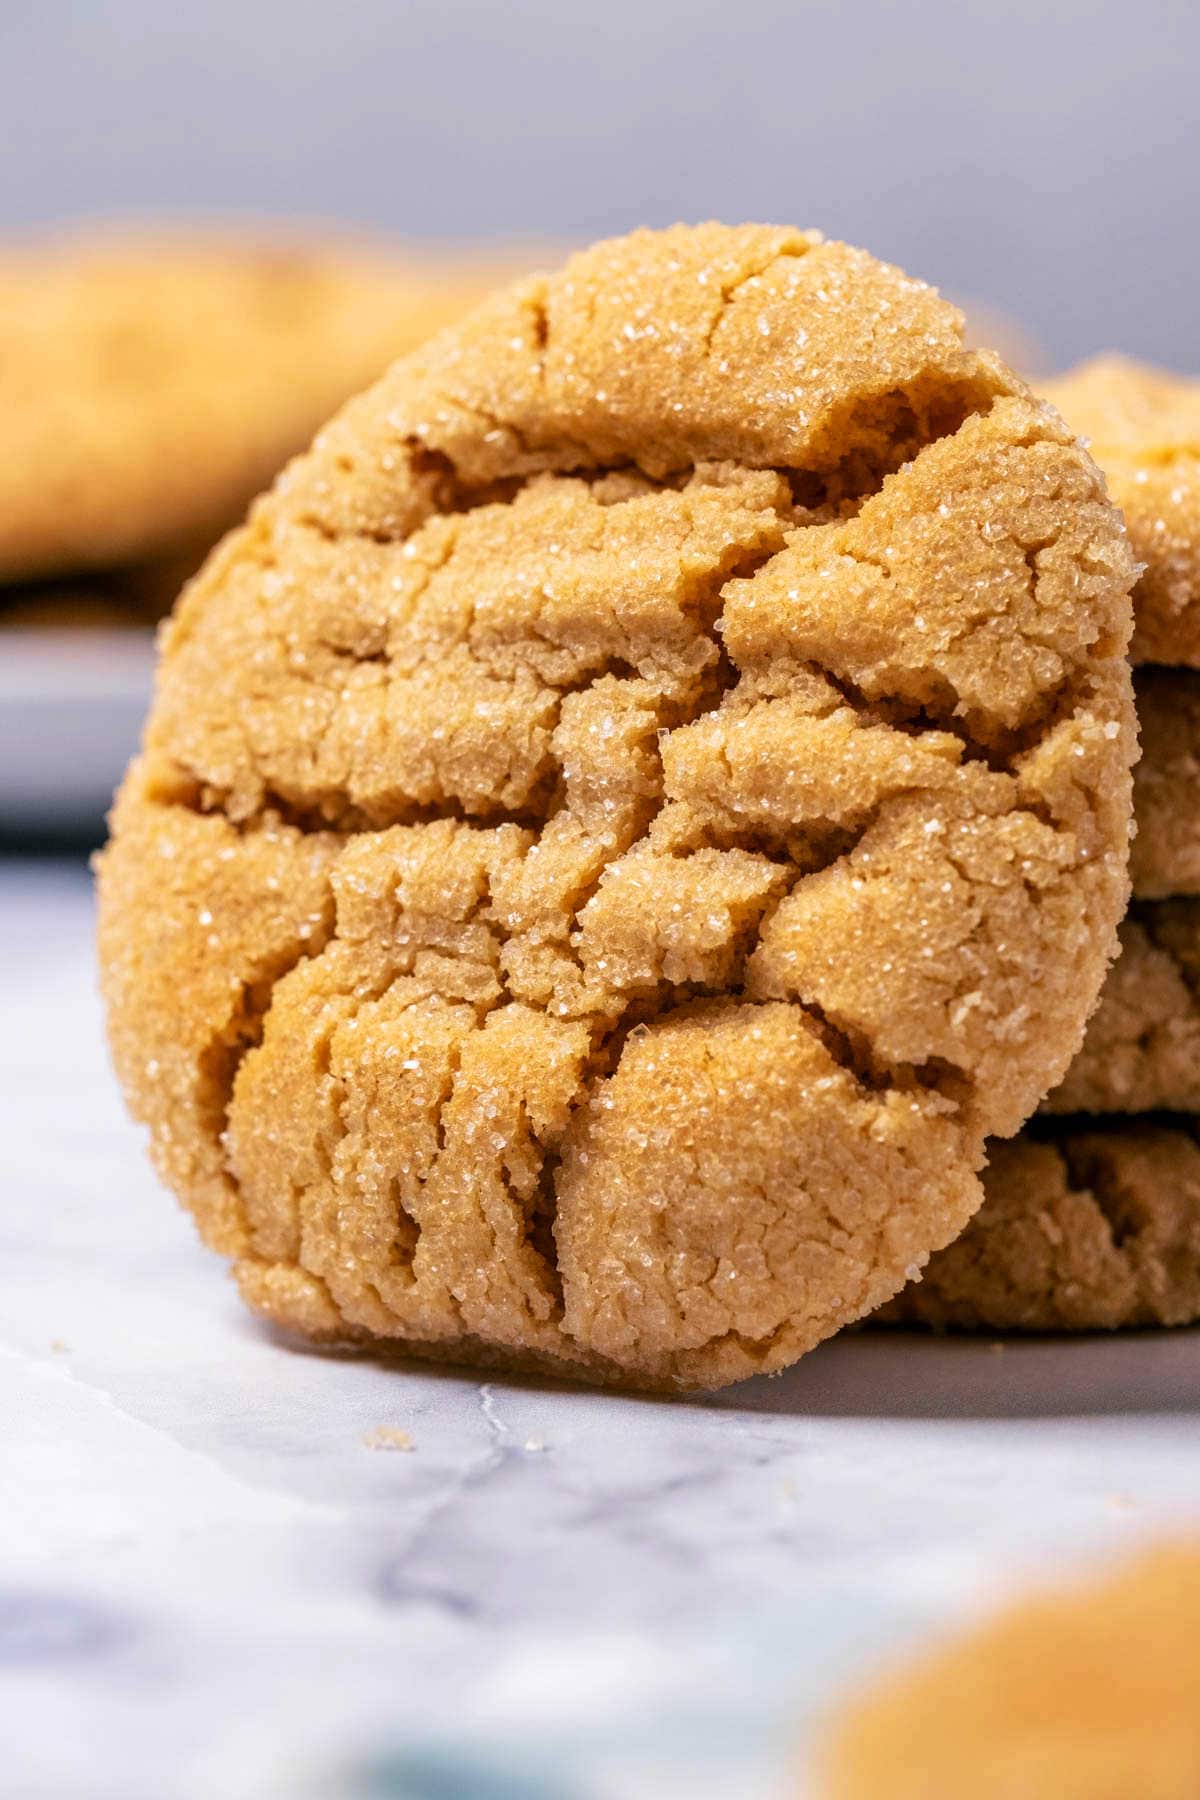 Peanut butter cookie leaning against a stack of cookies.